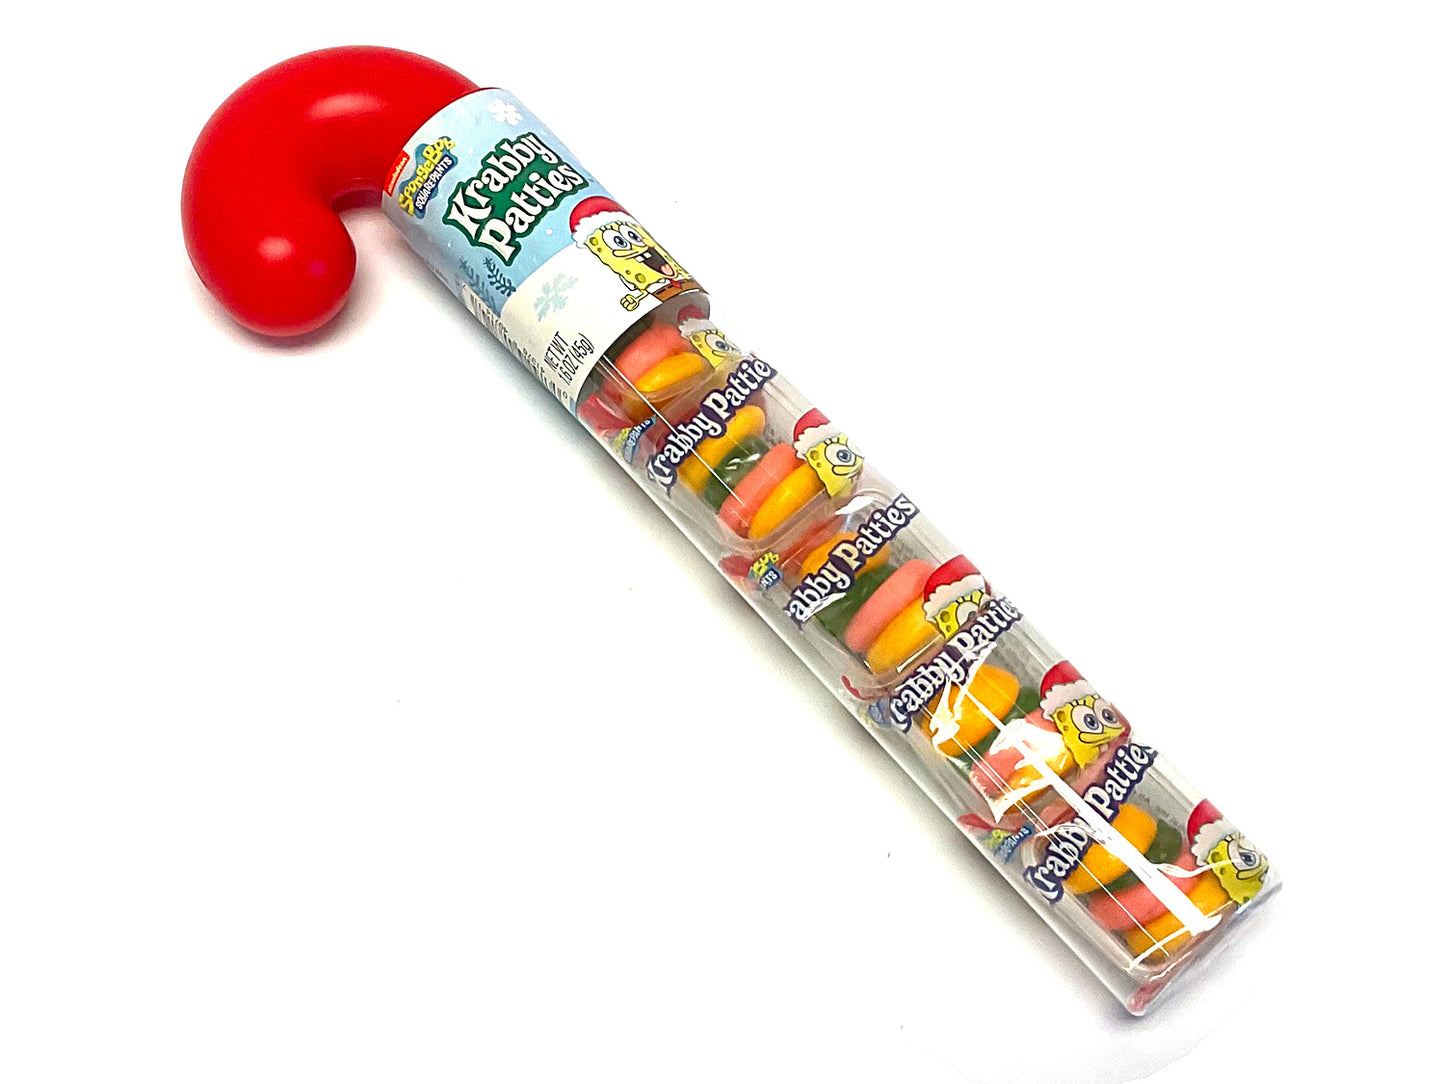 Candy Cane filled with Krabby Patties - 1.6 oz - 11 inch